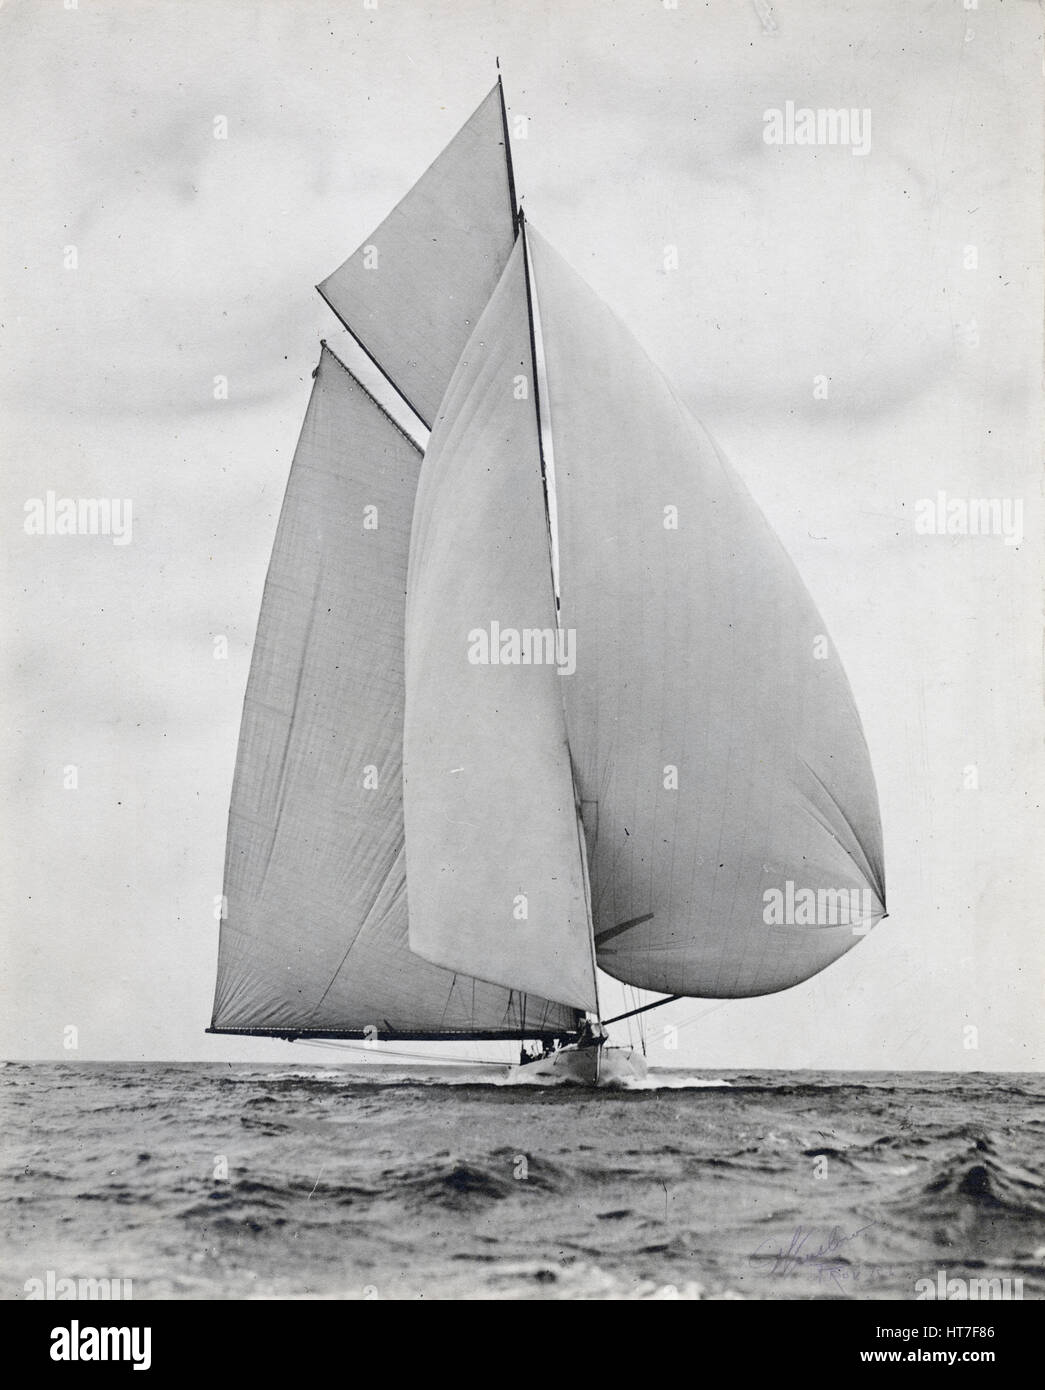 Antique c1900 photograph, unknown yacht belonging to Charles Oliver Iselin. Iselin (1854-1932) was an American banker and yachtsman. He participated in and won six consecutive America’s Cup races in 1887, 1893, 1895, 1899, 1901 and 1903. He owned yachts 'Defender,' 'Reliance,' 'Columbia' and others. Photograph by Winslow of Providence, Rhode Island. SOURCE: ORIGINAL SILVER GELATIN PRINT. Stock Photo